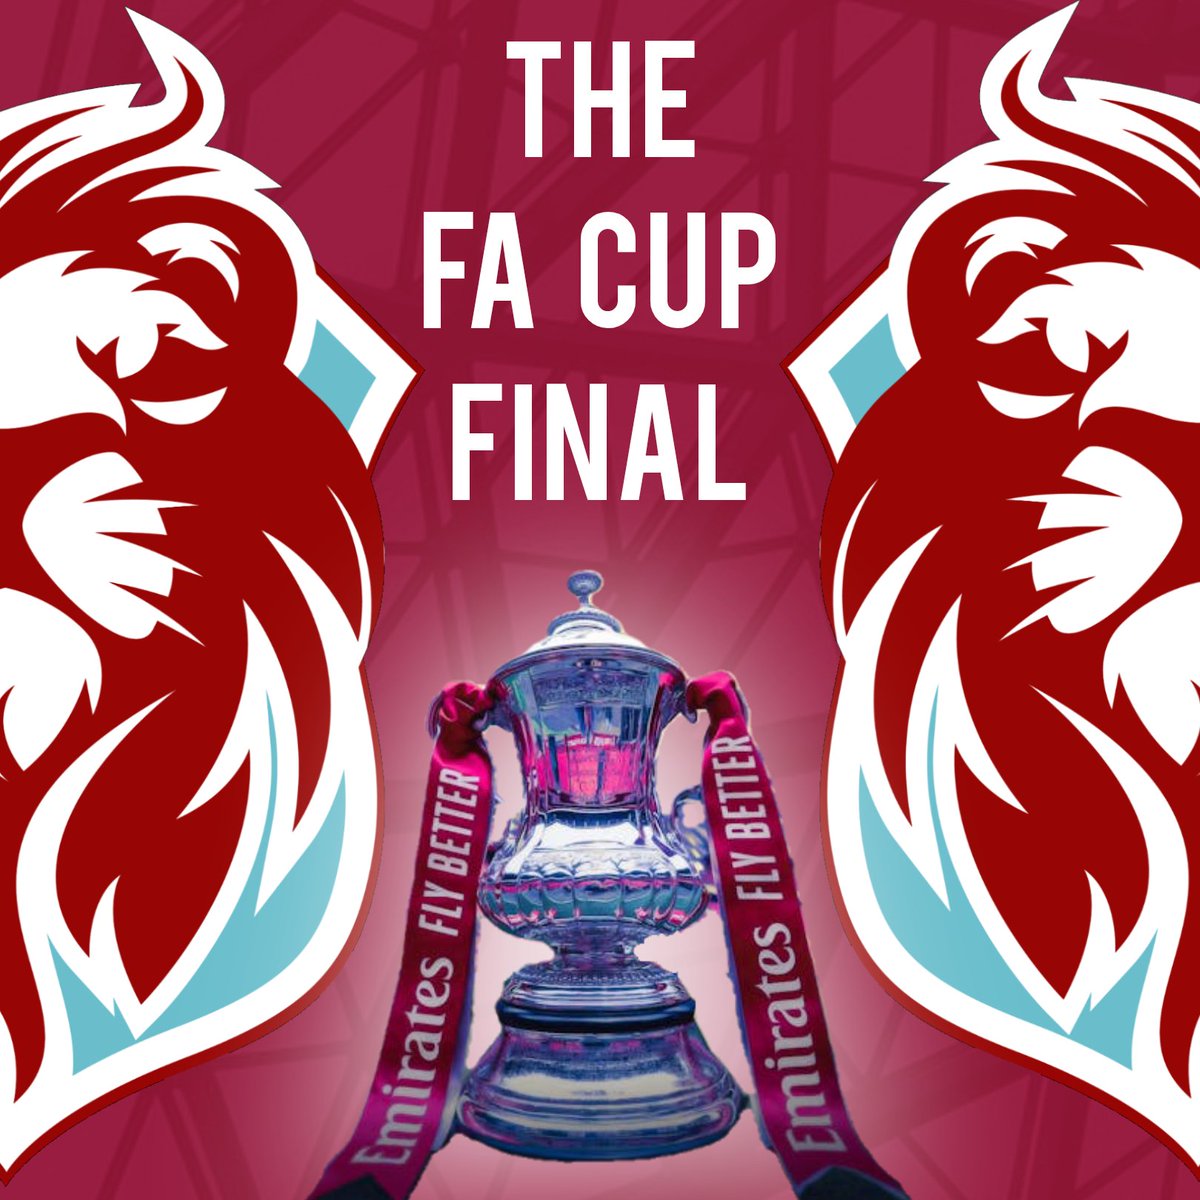 🏆 𝗧𝗛𝗘 𝗙𝗔 𝗖𝗨𝗣 𝗙𝗜𝗡𝗔𝗟 🏆 Join us at The Pilot Bar for The @EmiratesFACup Final Saturday 25th May 3PM @ManCity v @ManUtd We are open from 1pm #COYU #FACup #HUFC